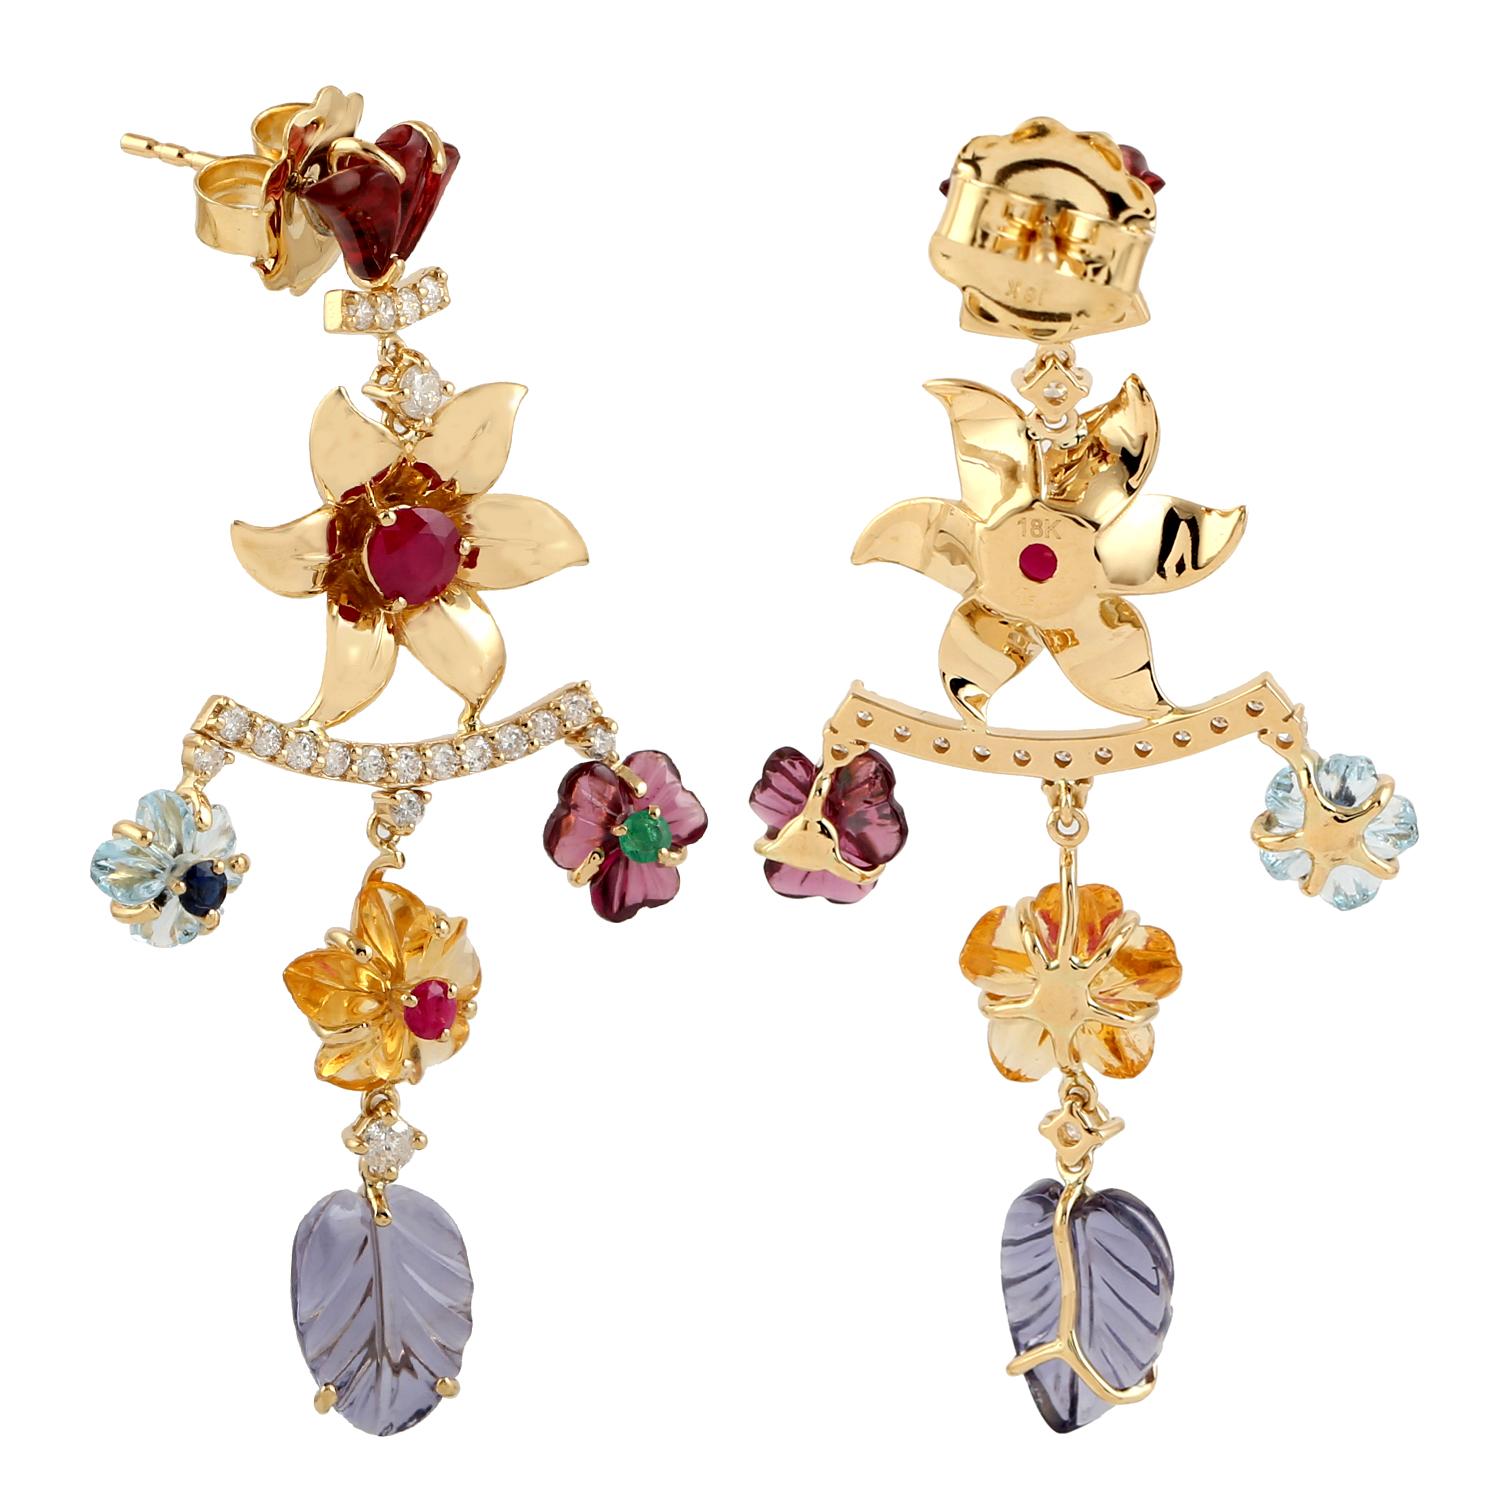 Cast in 14-karat gold. These beautiful earrings are set with 12.2 carats of carved multi gemstone, emerald, topaz, amethyst, citrine, ruby and .69 carats of sparkling diamonds.  See other flower collection matching pieces.

FOLLOW  MEGHNA JEWELS